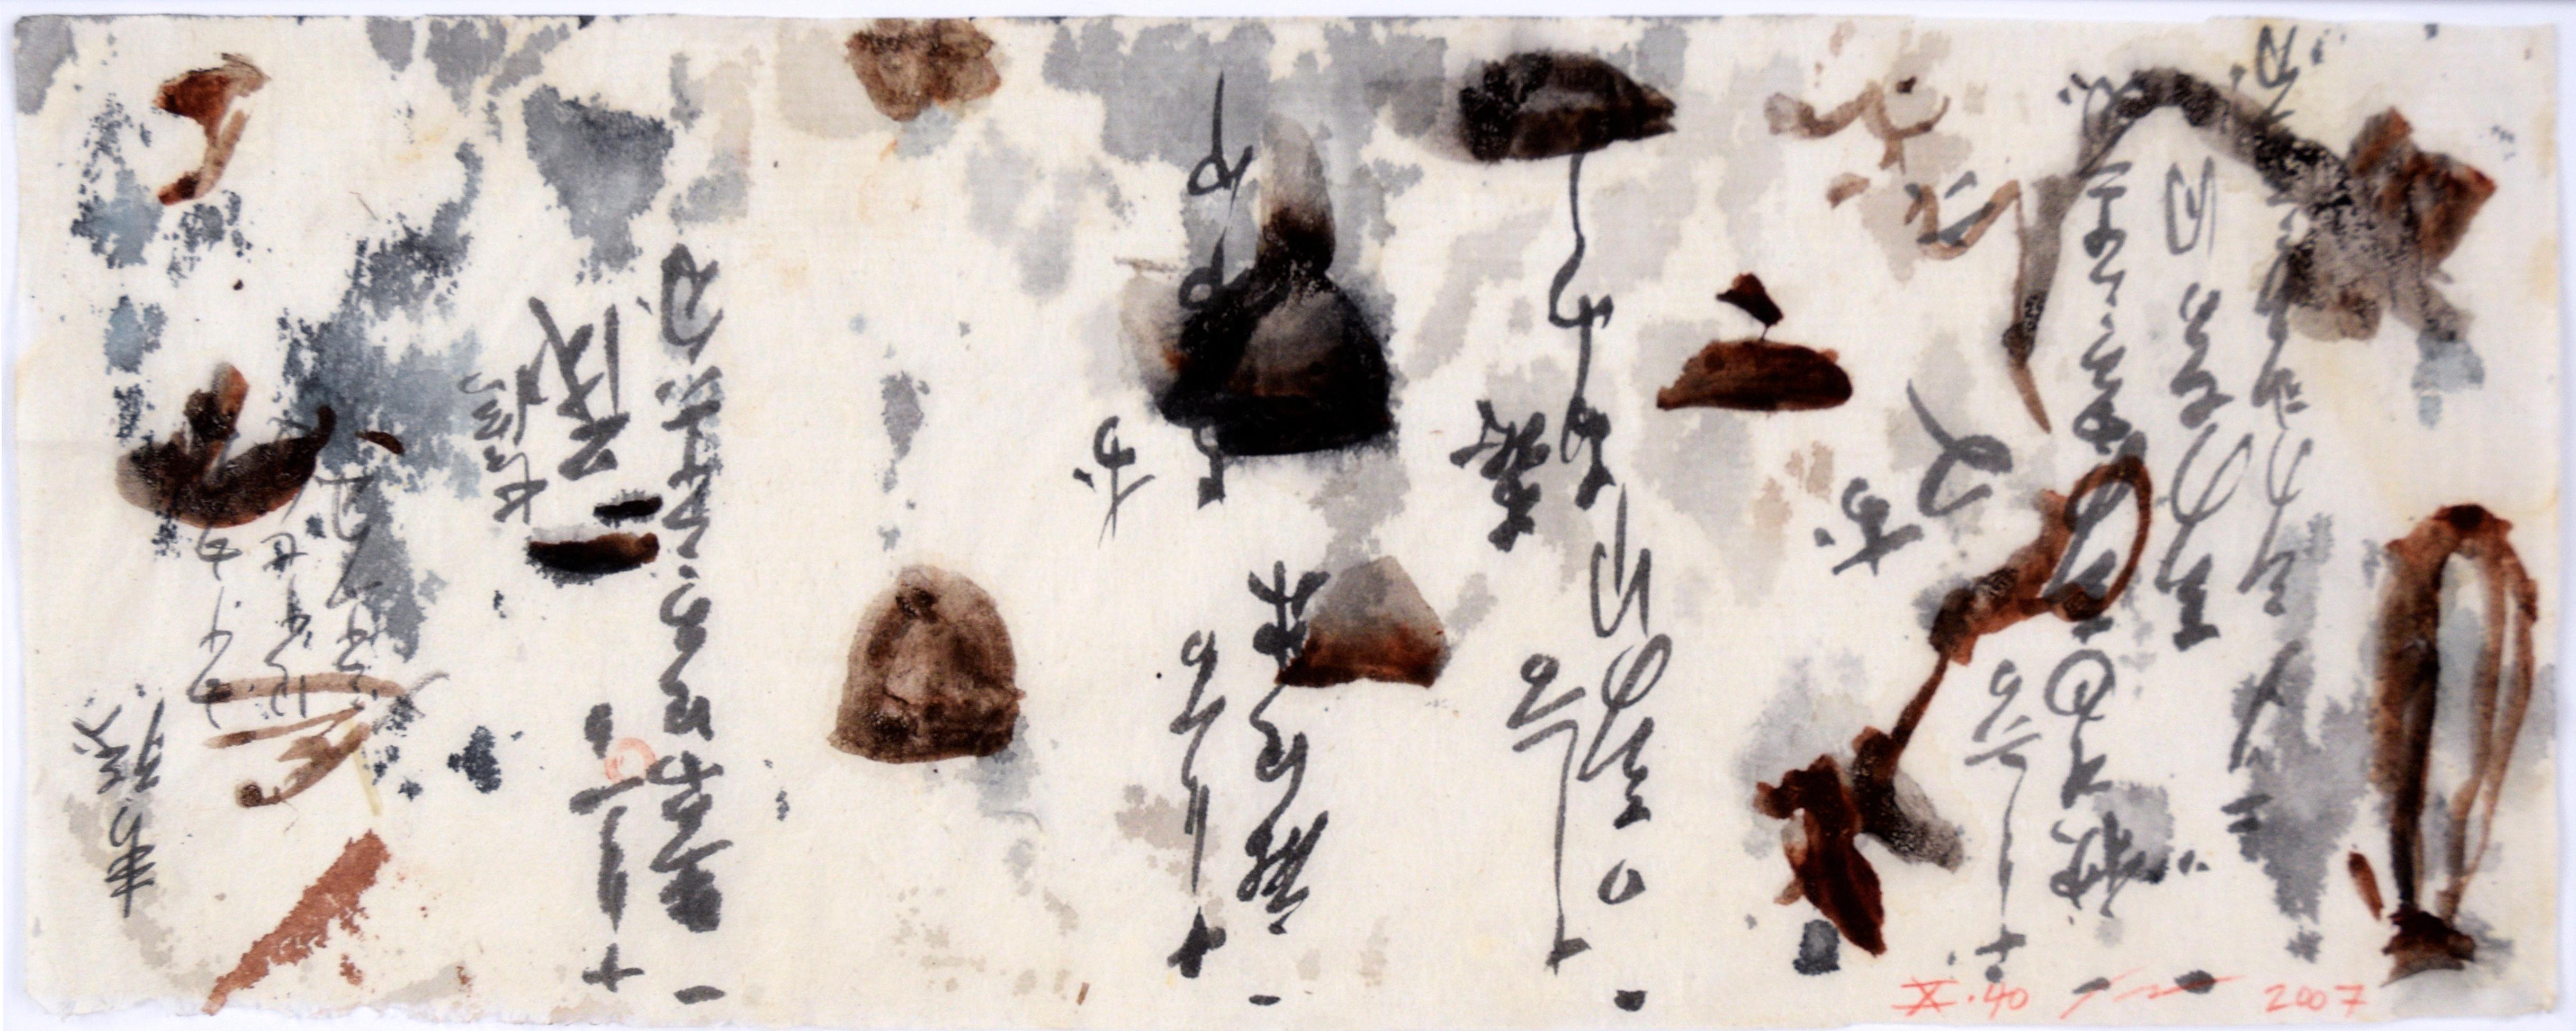 Calligraphy Abstract Panorama III - Japanese Calligraphy on Rice Paper - Painting by Michael Pauker 